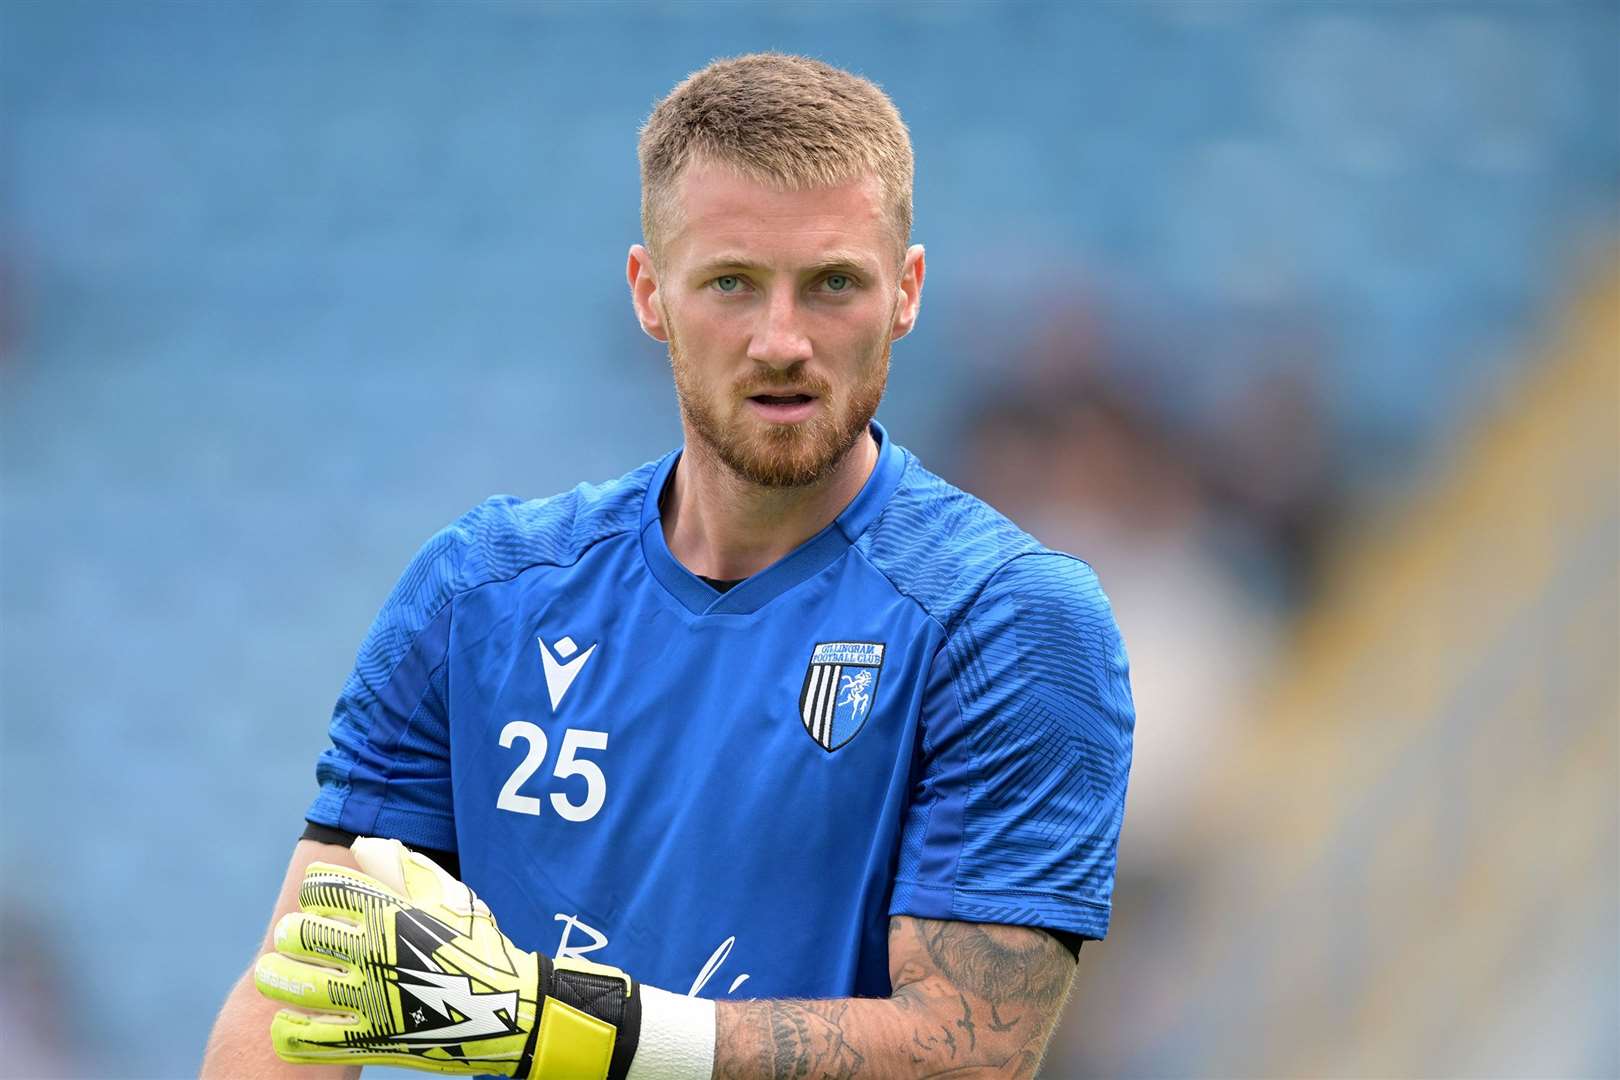 Gillingham goalkeeper Jake Turner has returned after a brief time out following an injury Picture: Keith Gillard